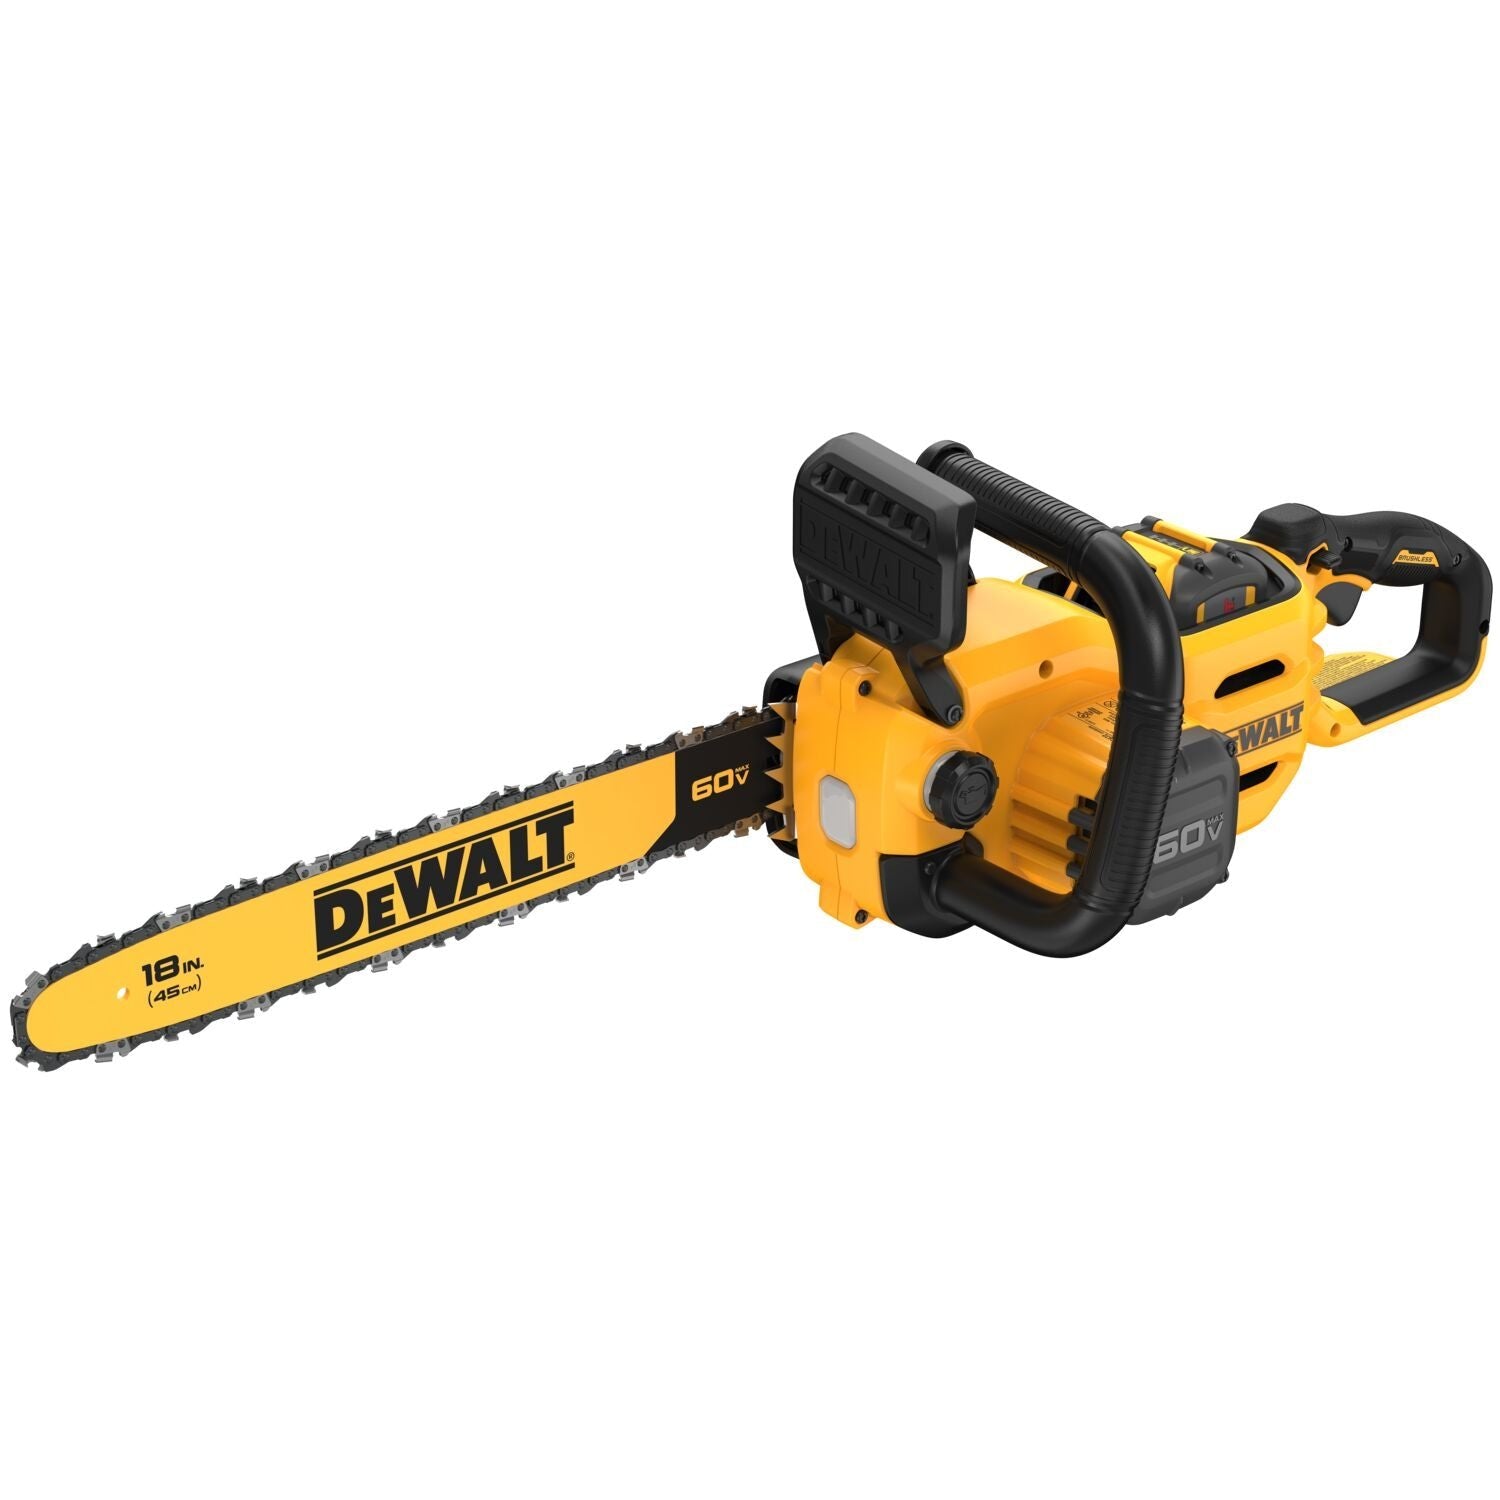 DEWALT DCCS672X1 60V MAX* 18 IN. 9.0Ah BRUSHLESS CORDLESS CHAINSAW